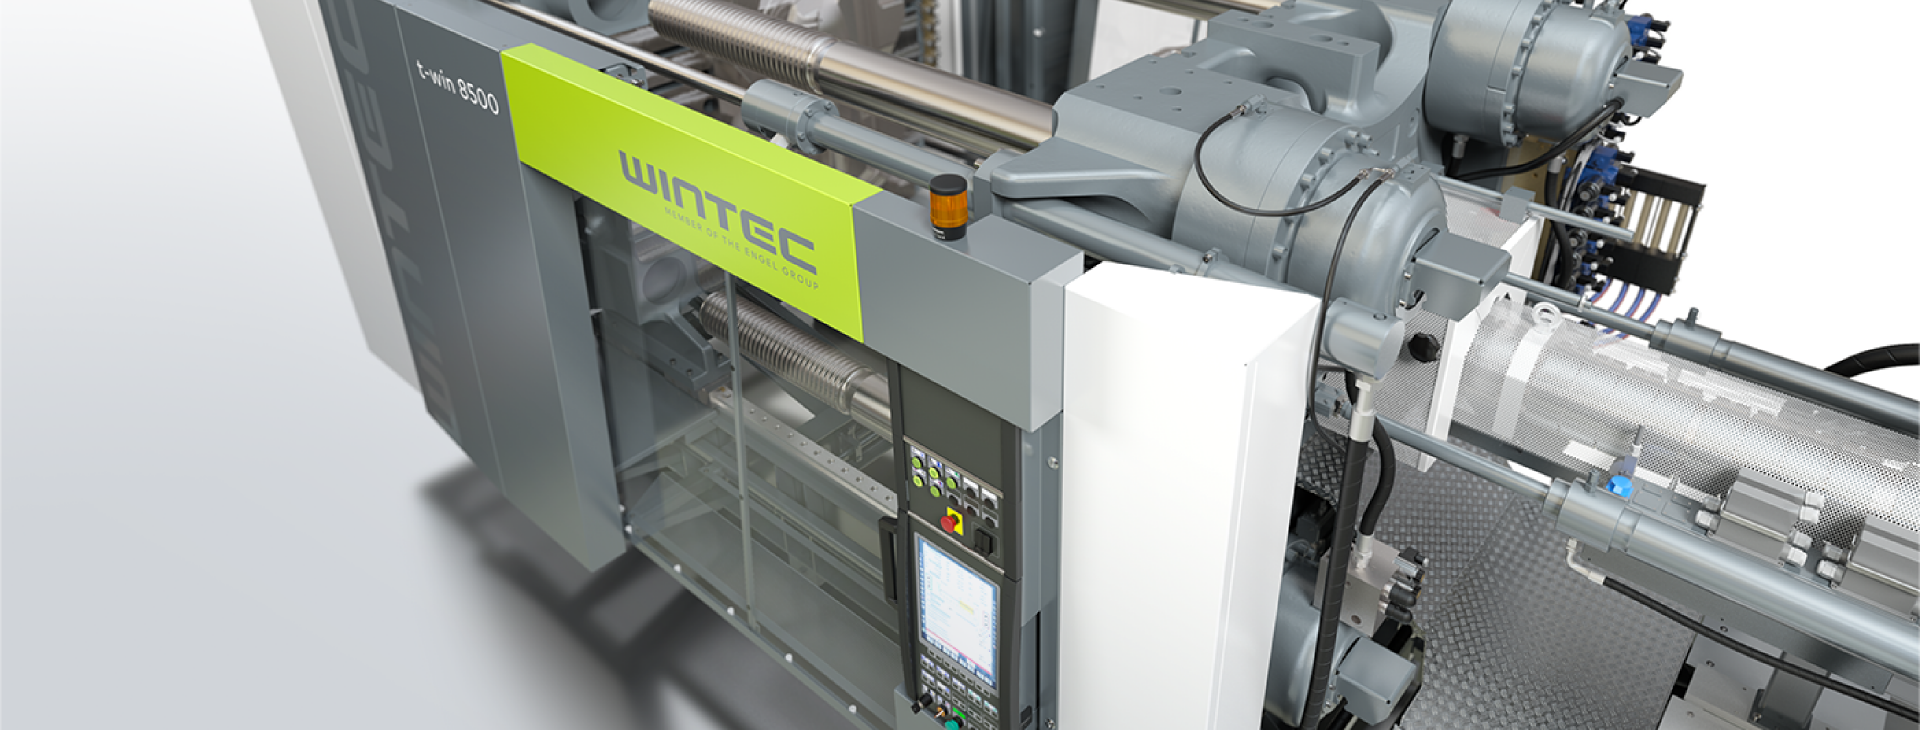 brand identity and product design for Wintec | Header image | Vienna